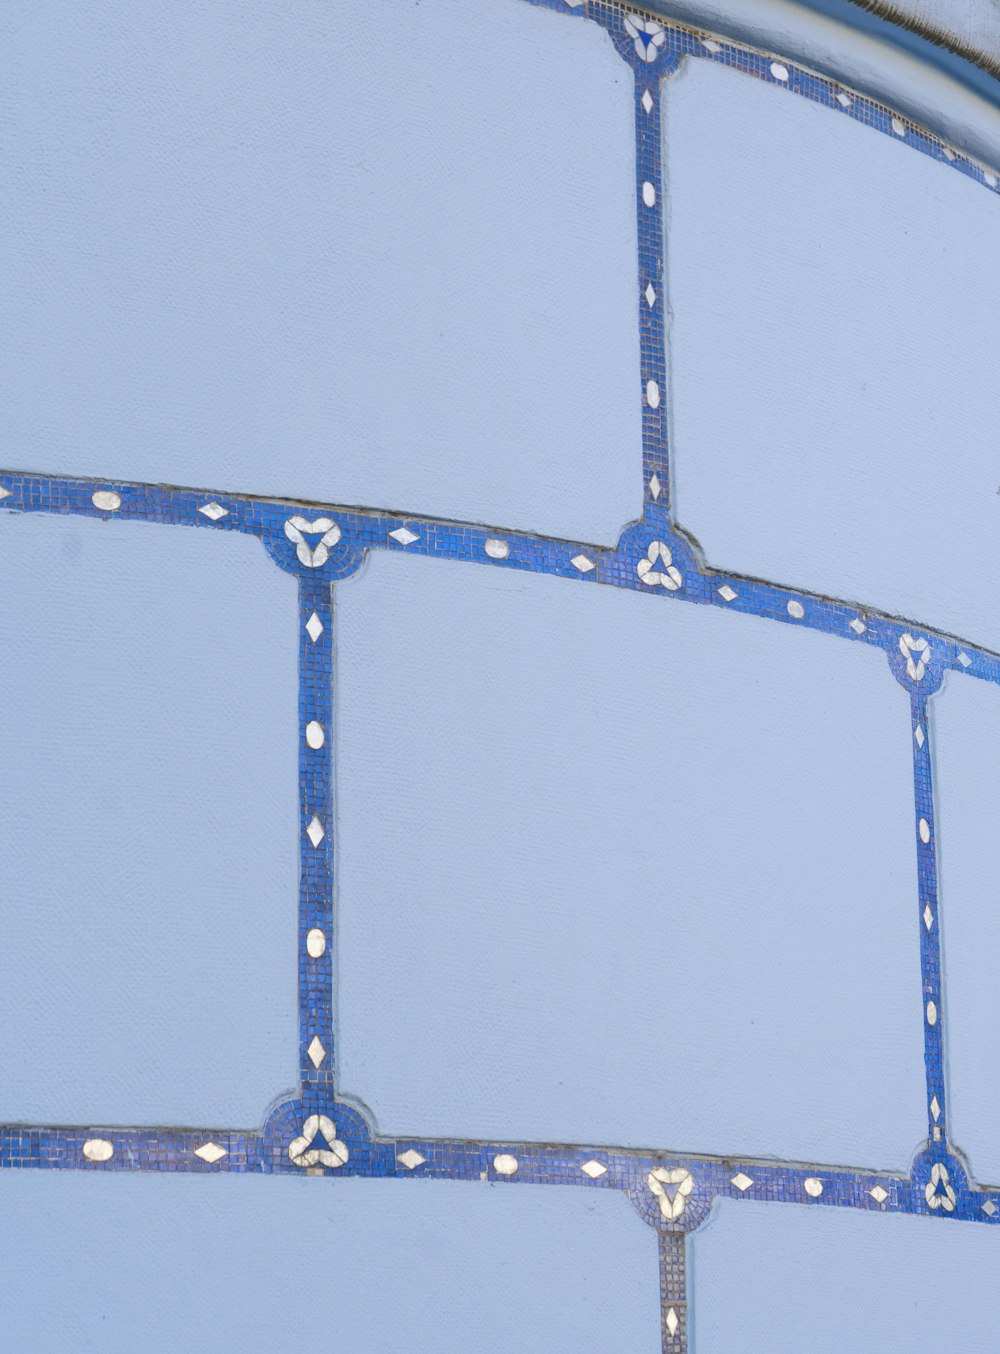 a close up of a metal structure with blue paint